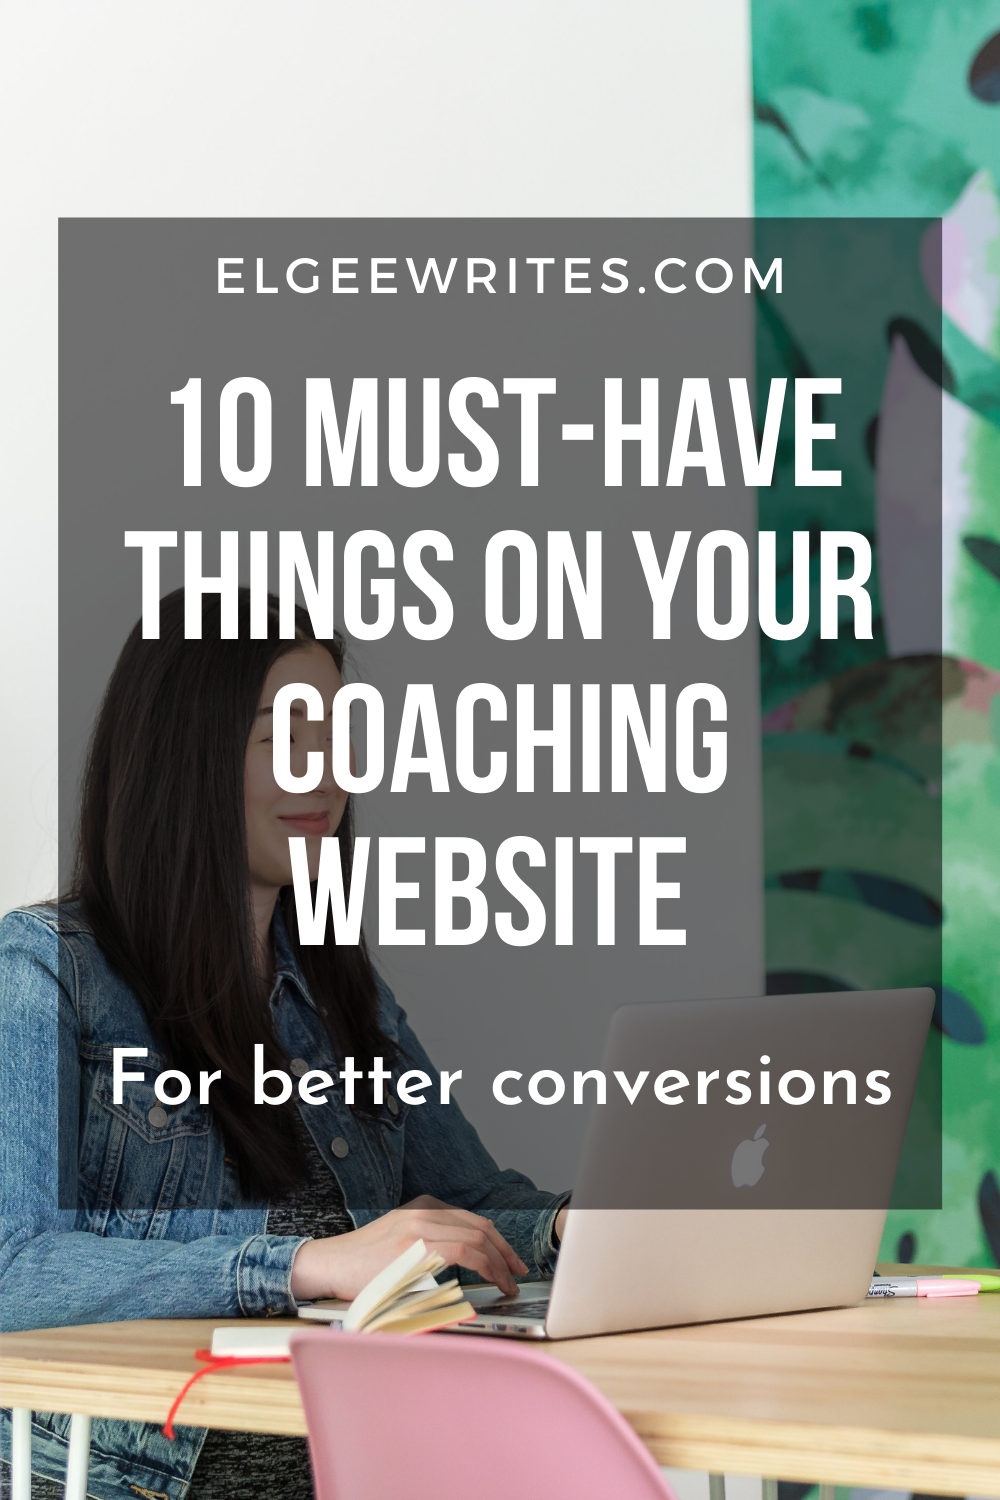 10 must-have things on your coaching business website Pinterest